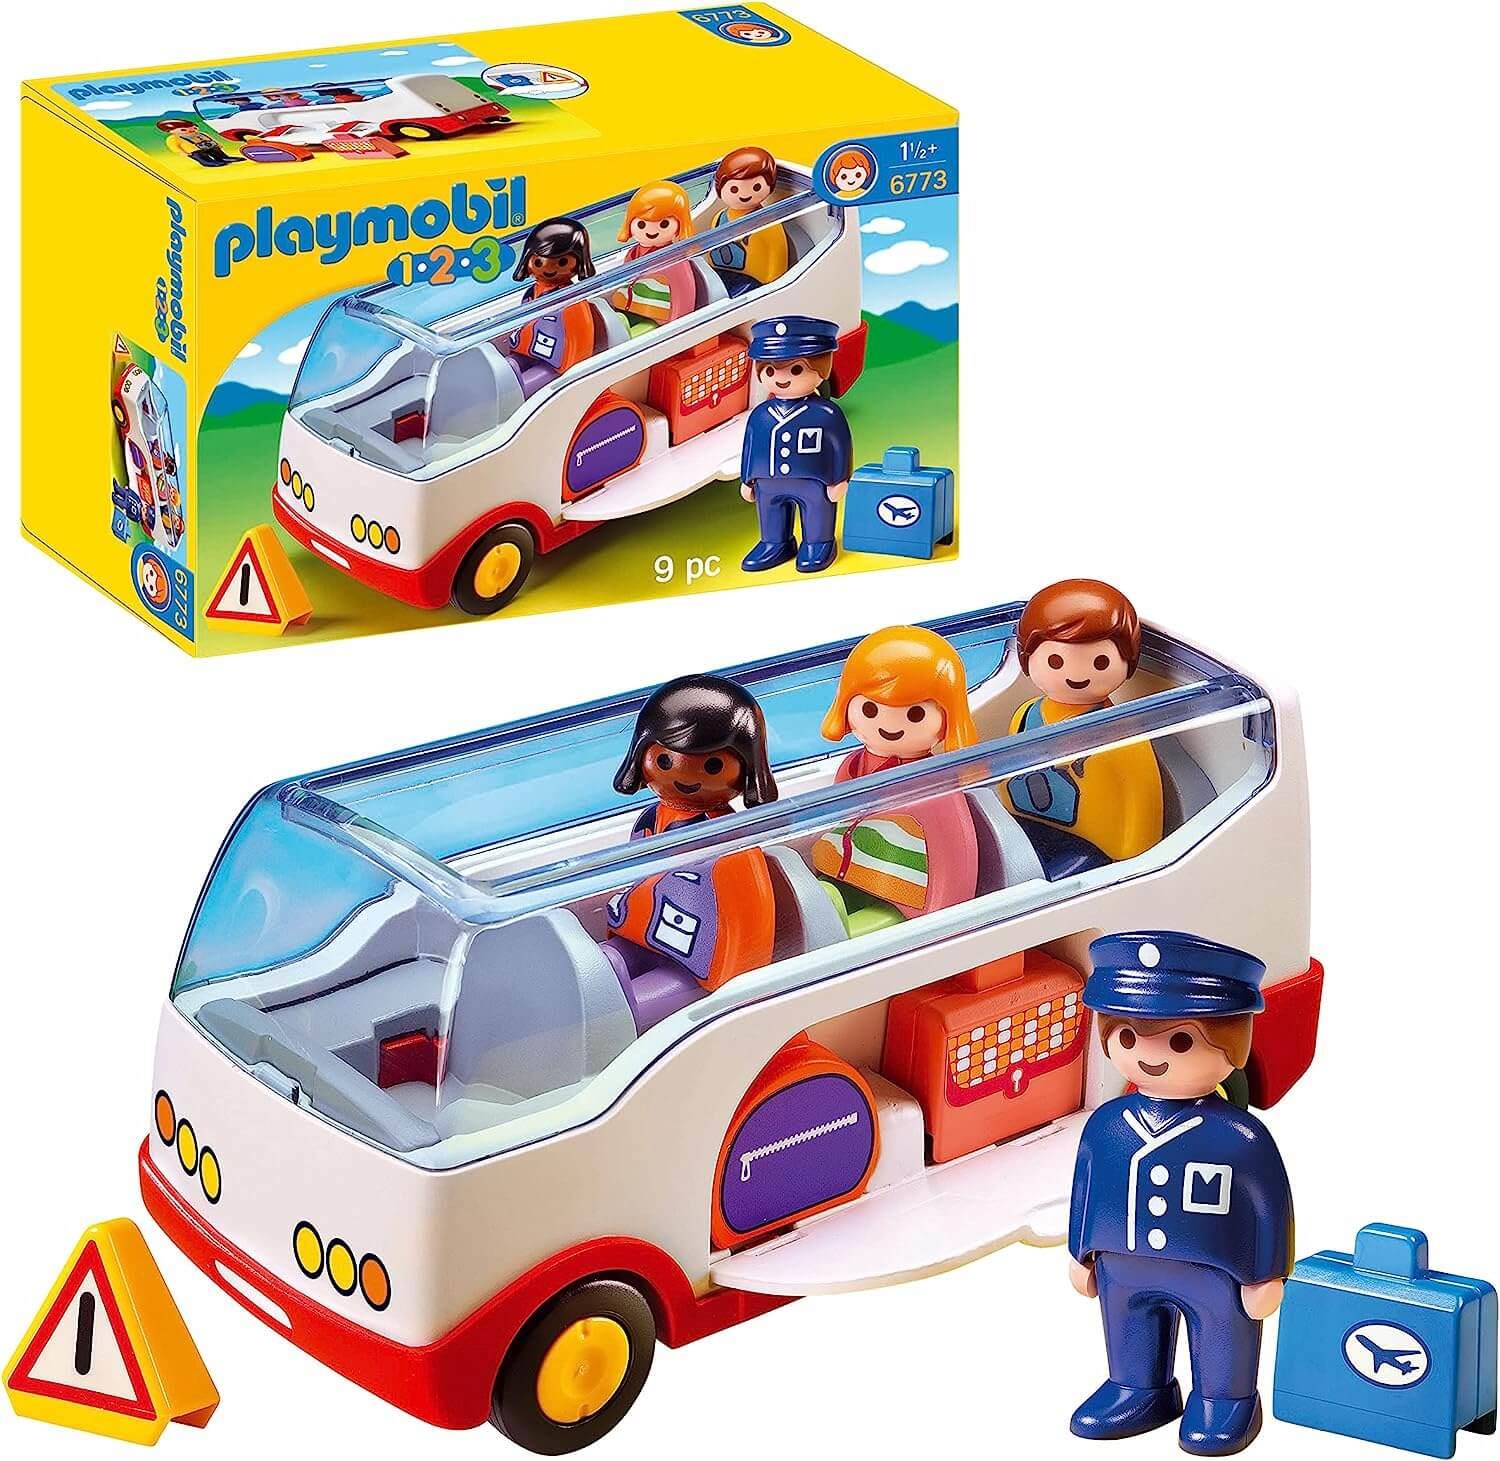 Playmobil 1.2.3 6773 Airport Shuttle Bus with Sorting Function